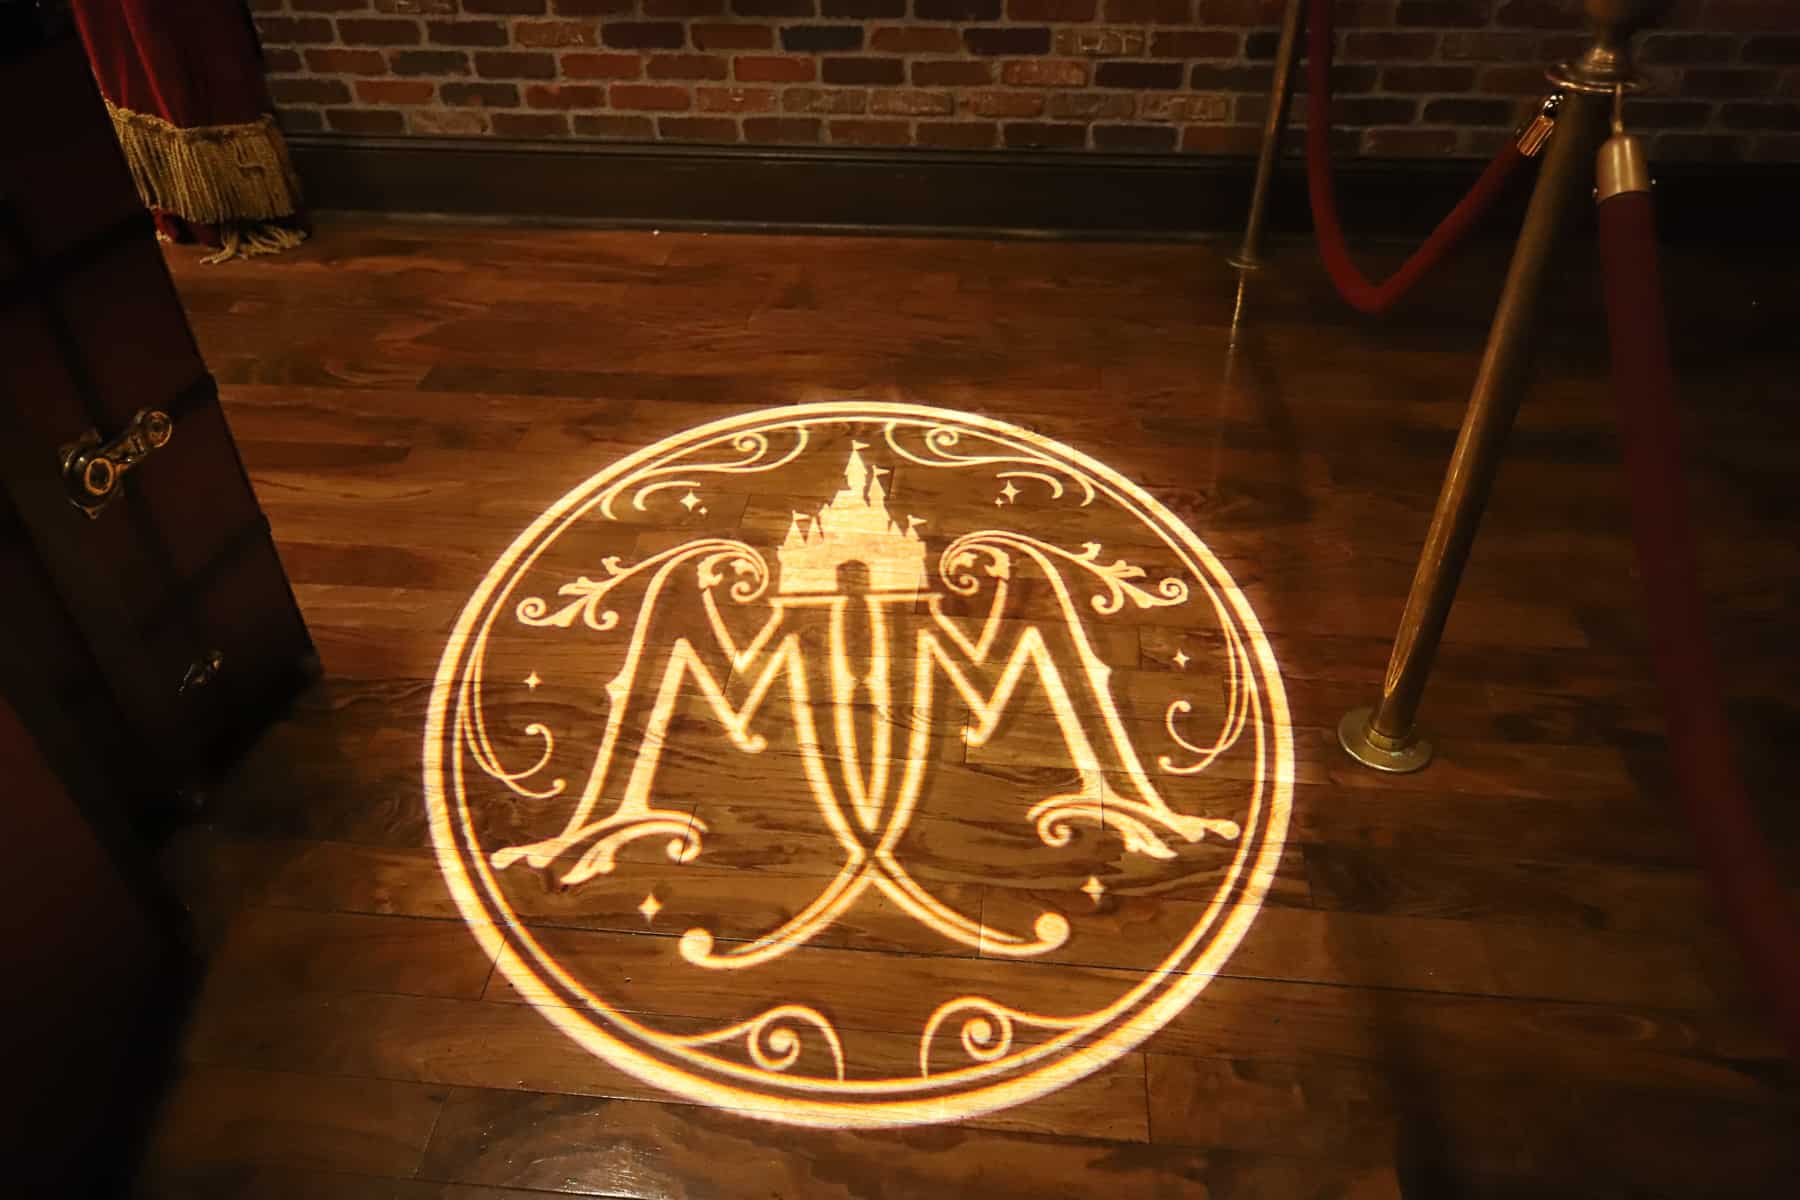 Mickey's logo highlighted on the floor of his character meet. 